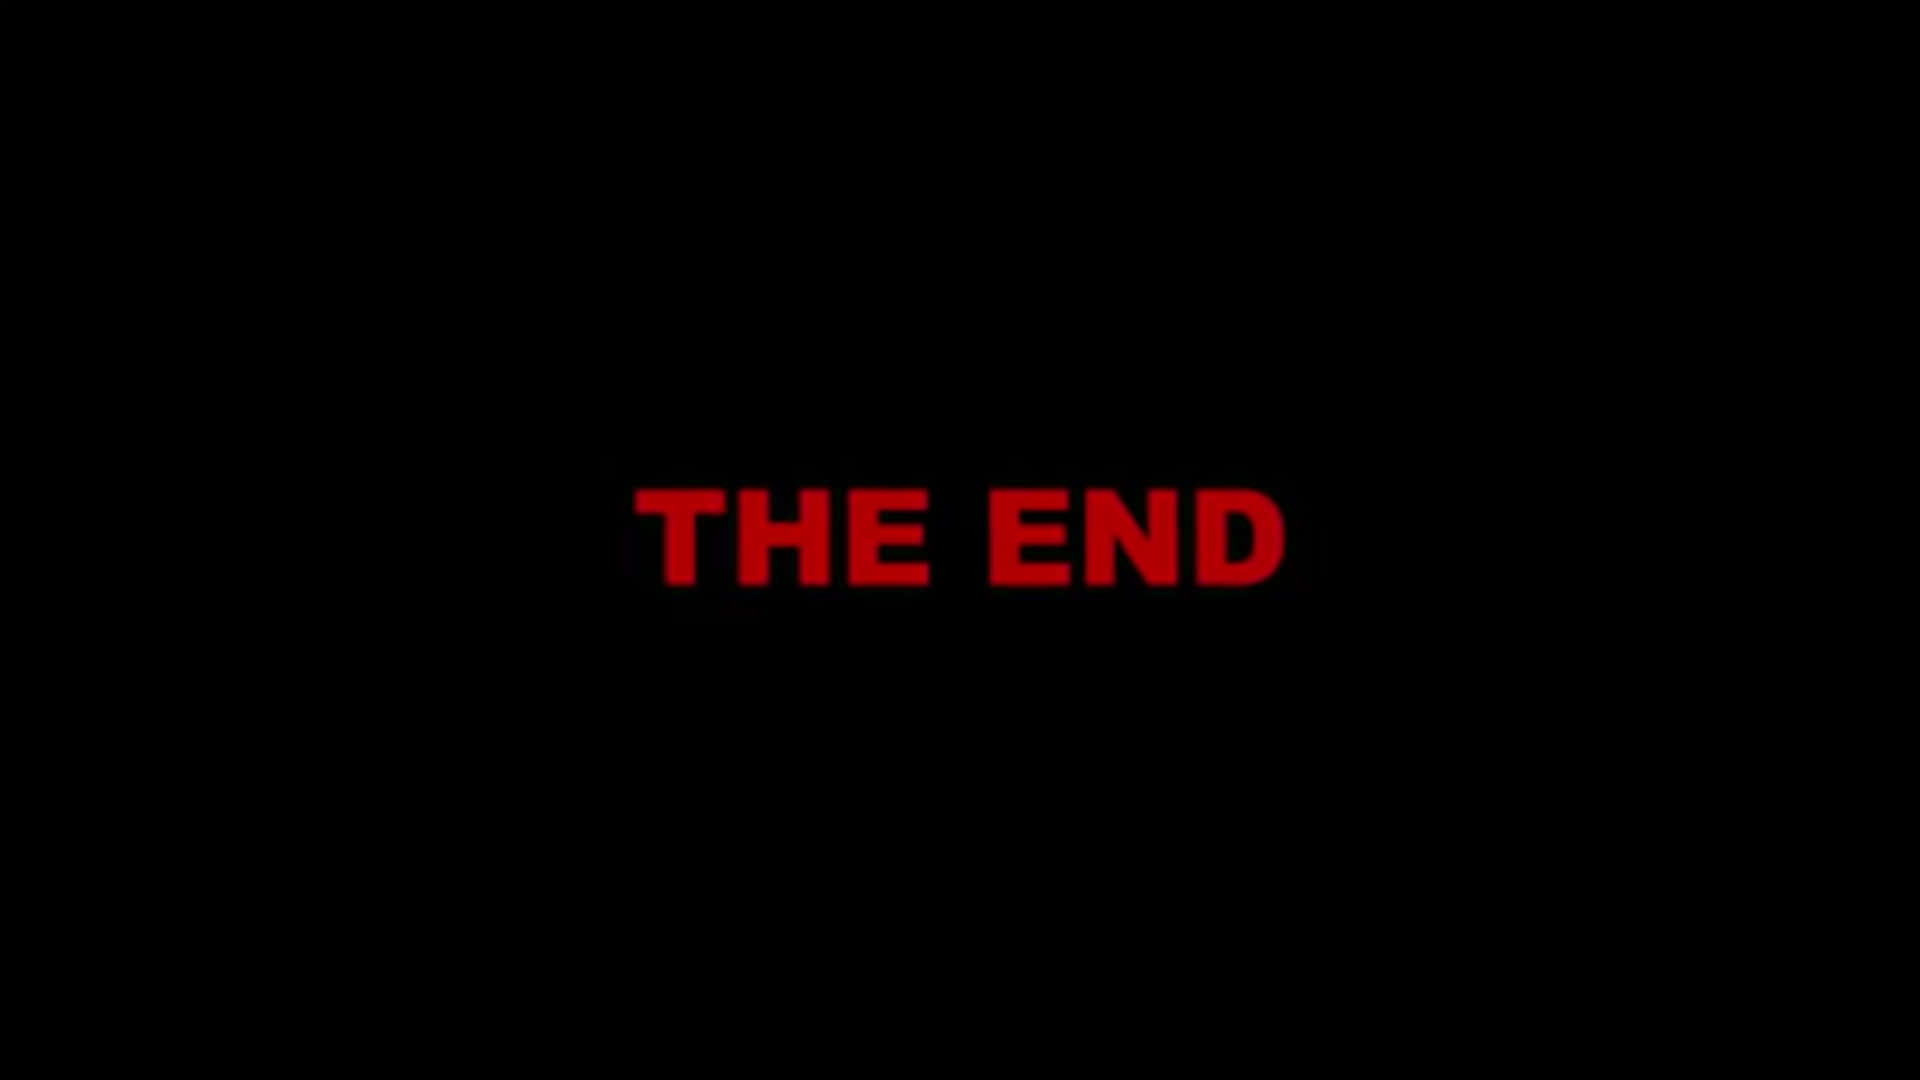 The End 1920 X 1080 Background